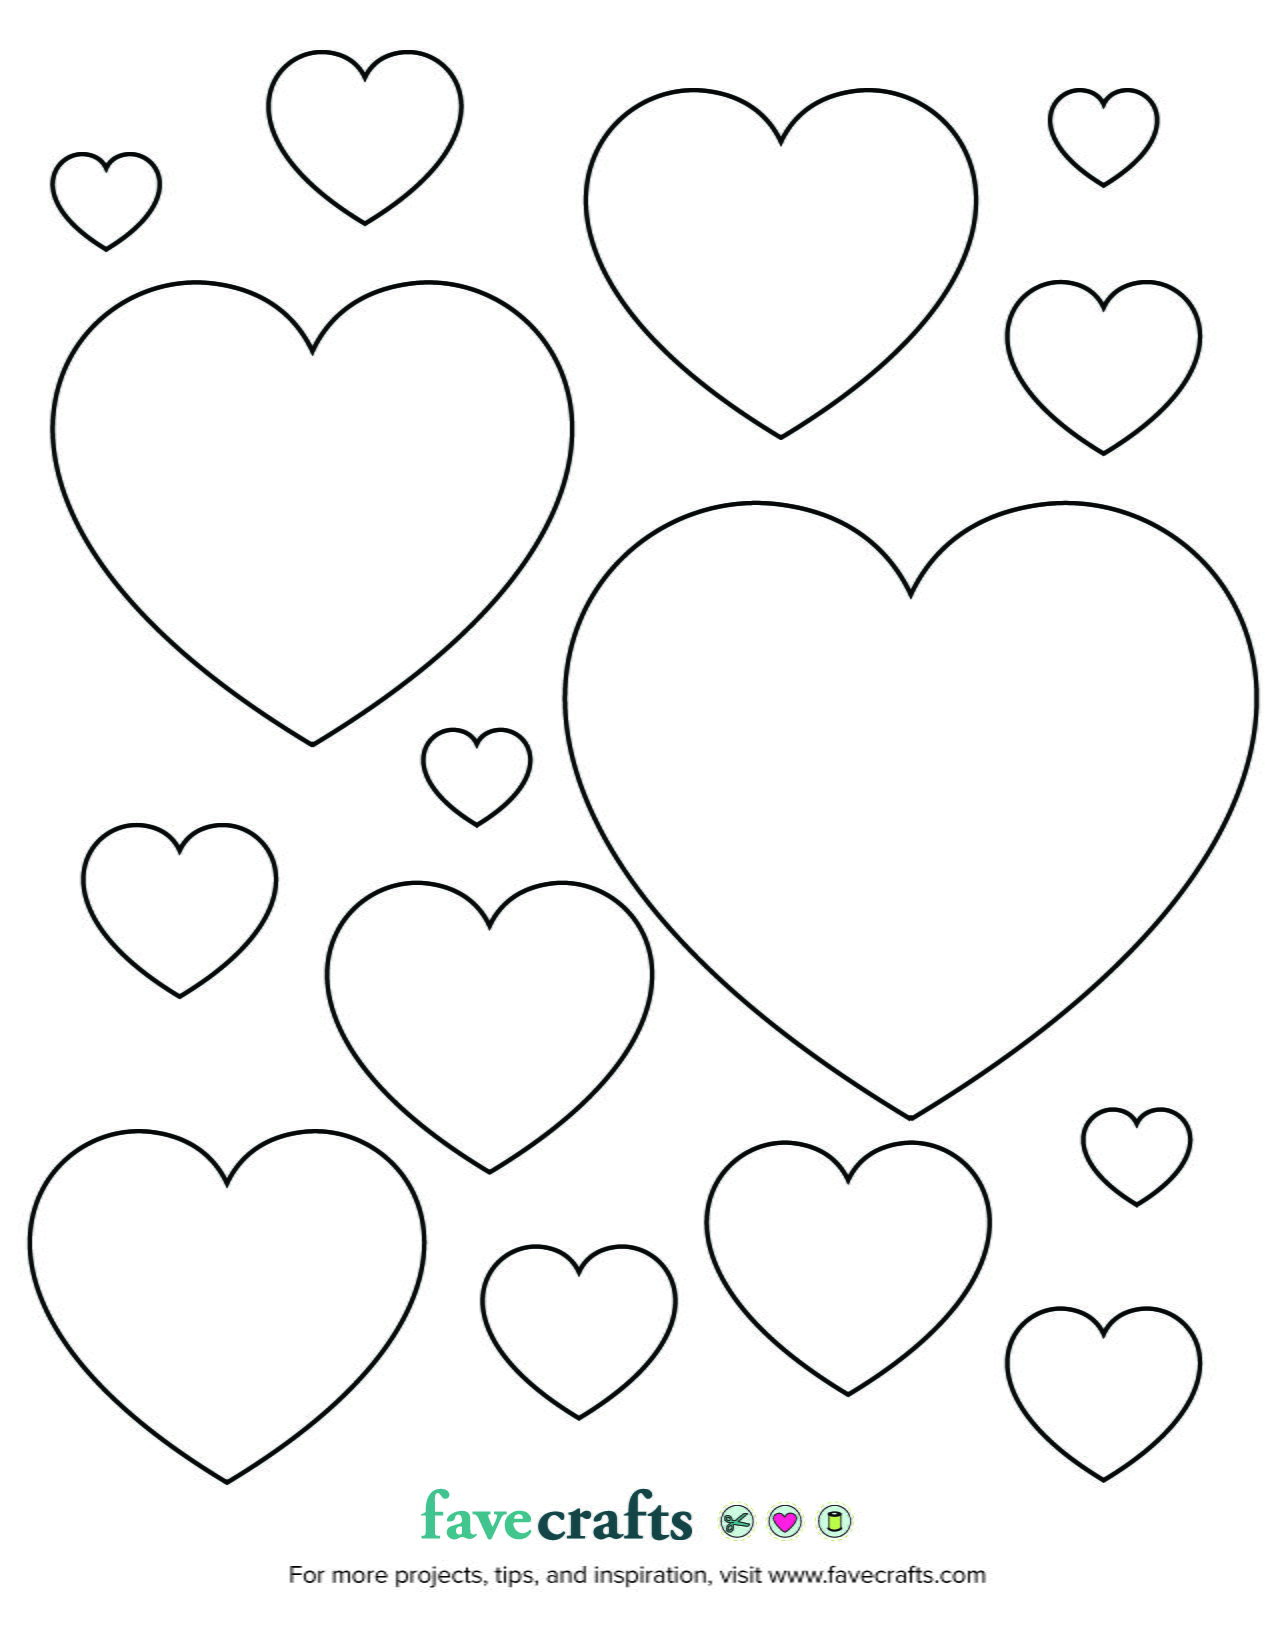 Printable Hearts to Color